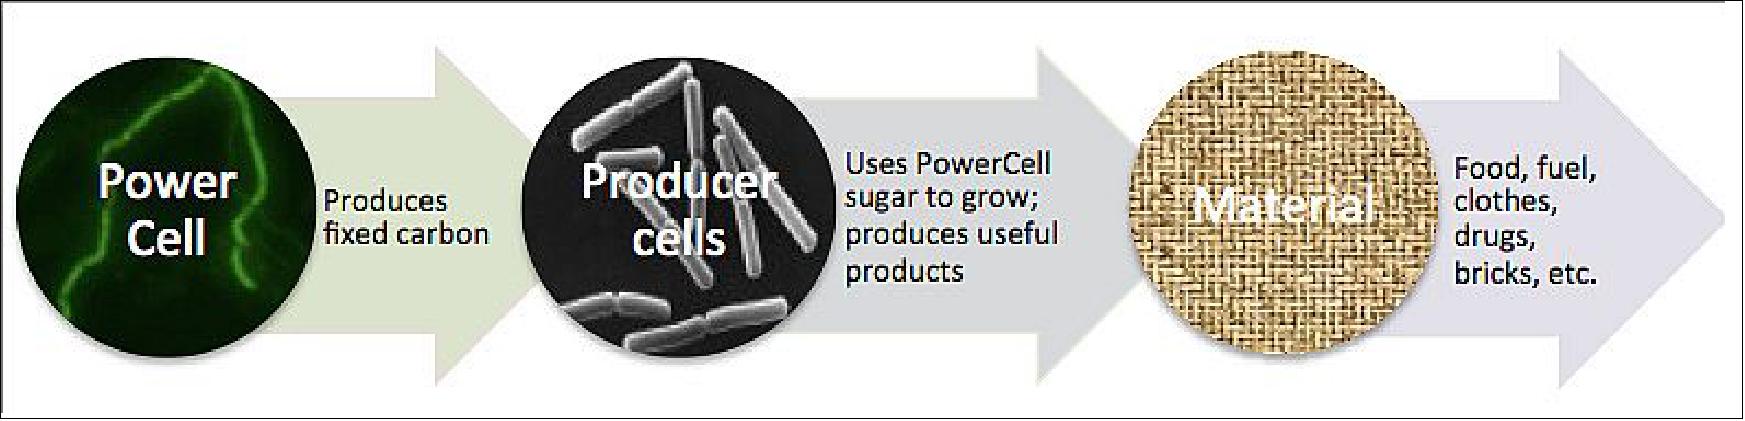 Figure 11: Schematic view of the PowerCell concept (image credit: NASA/ARC)